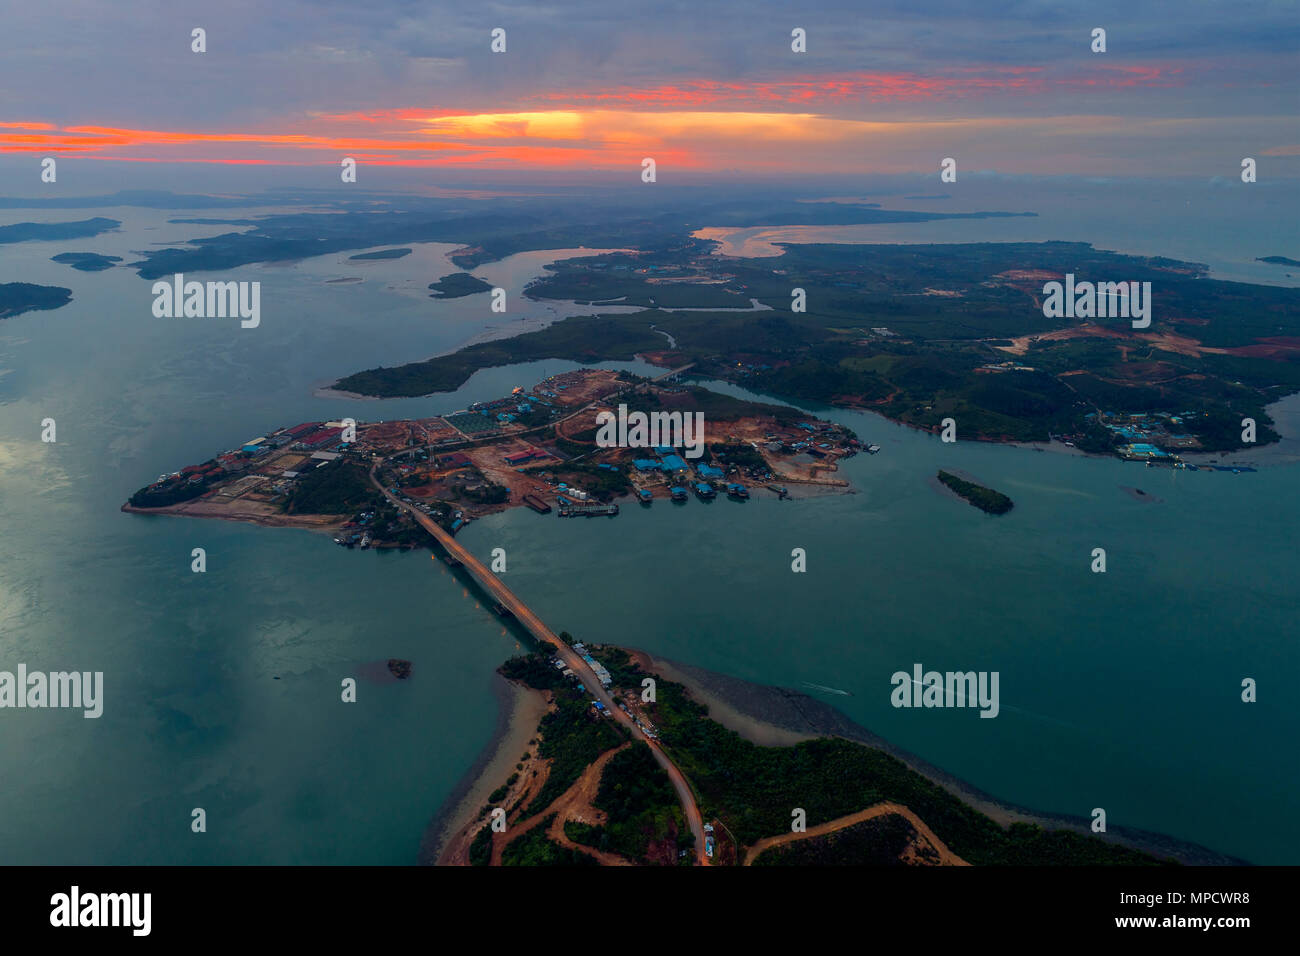 Aerial view of Barelang Bridge a chain of six bridges of various types that connect the islands of Batam at sunrise, Indonesia Stock Photo